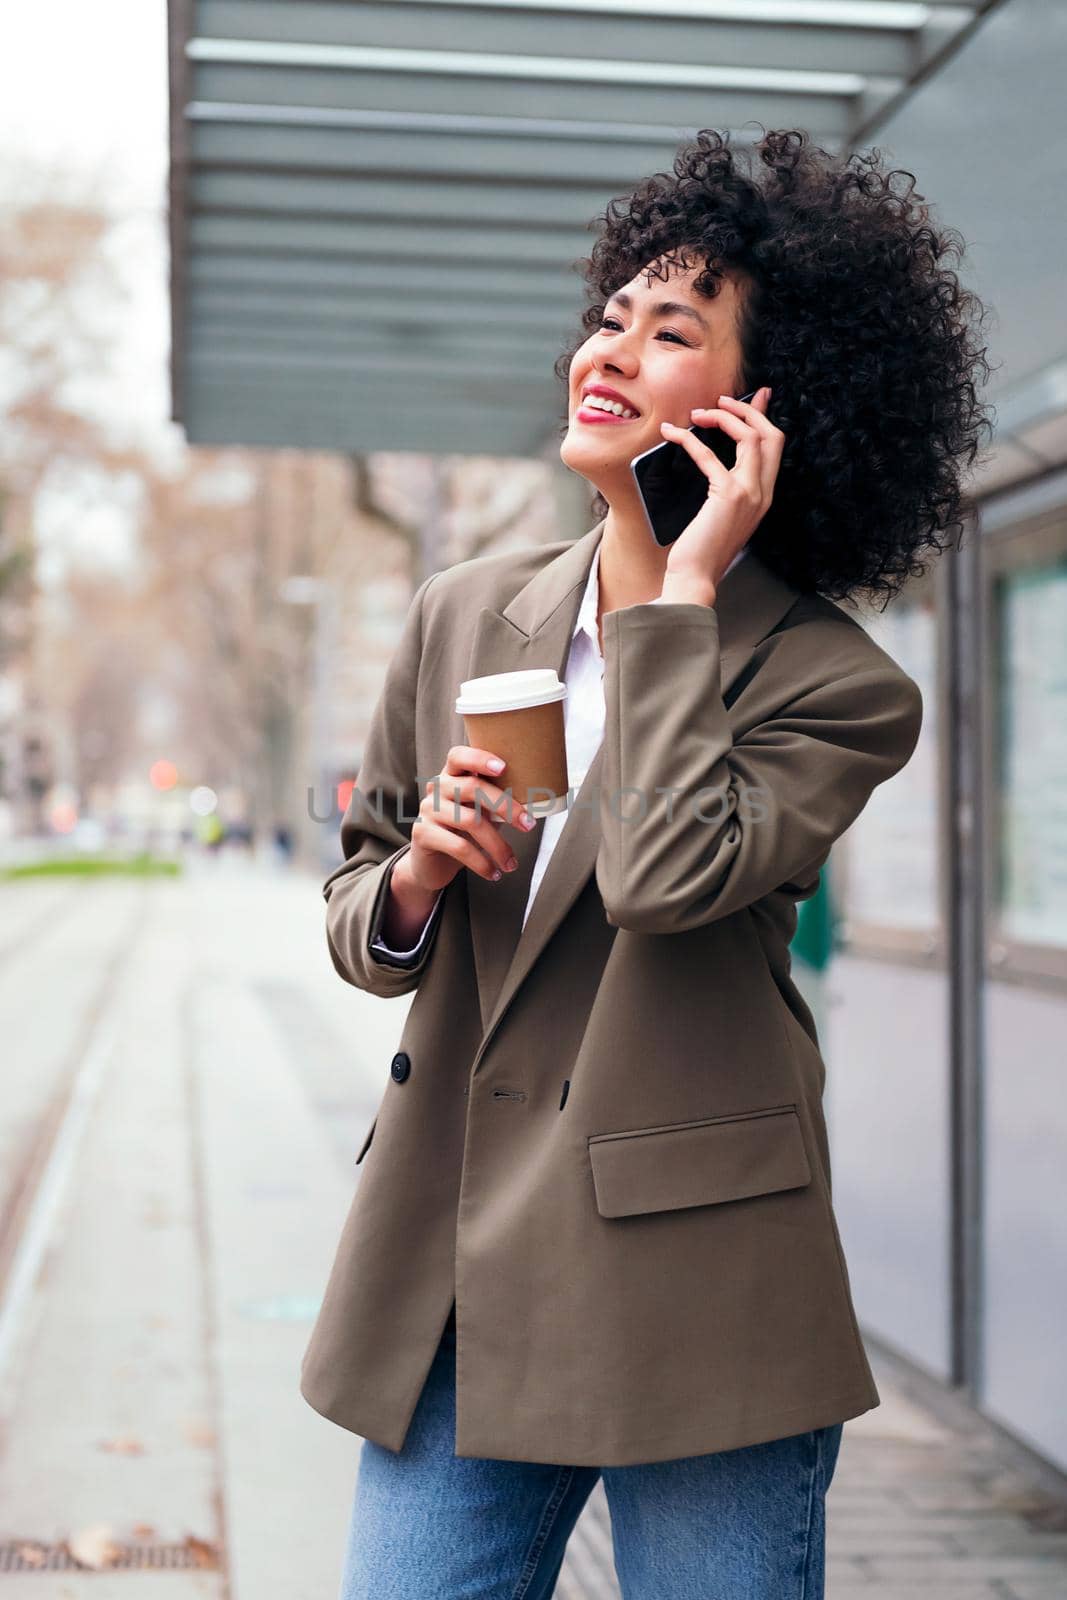 young latin businesswoman talking happy on the phone outdoors, concept of communication and urban lifestyle